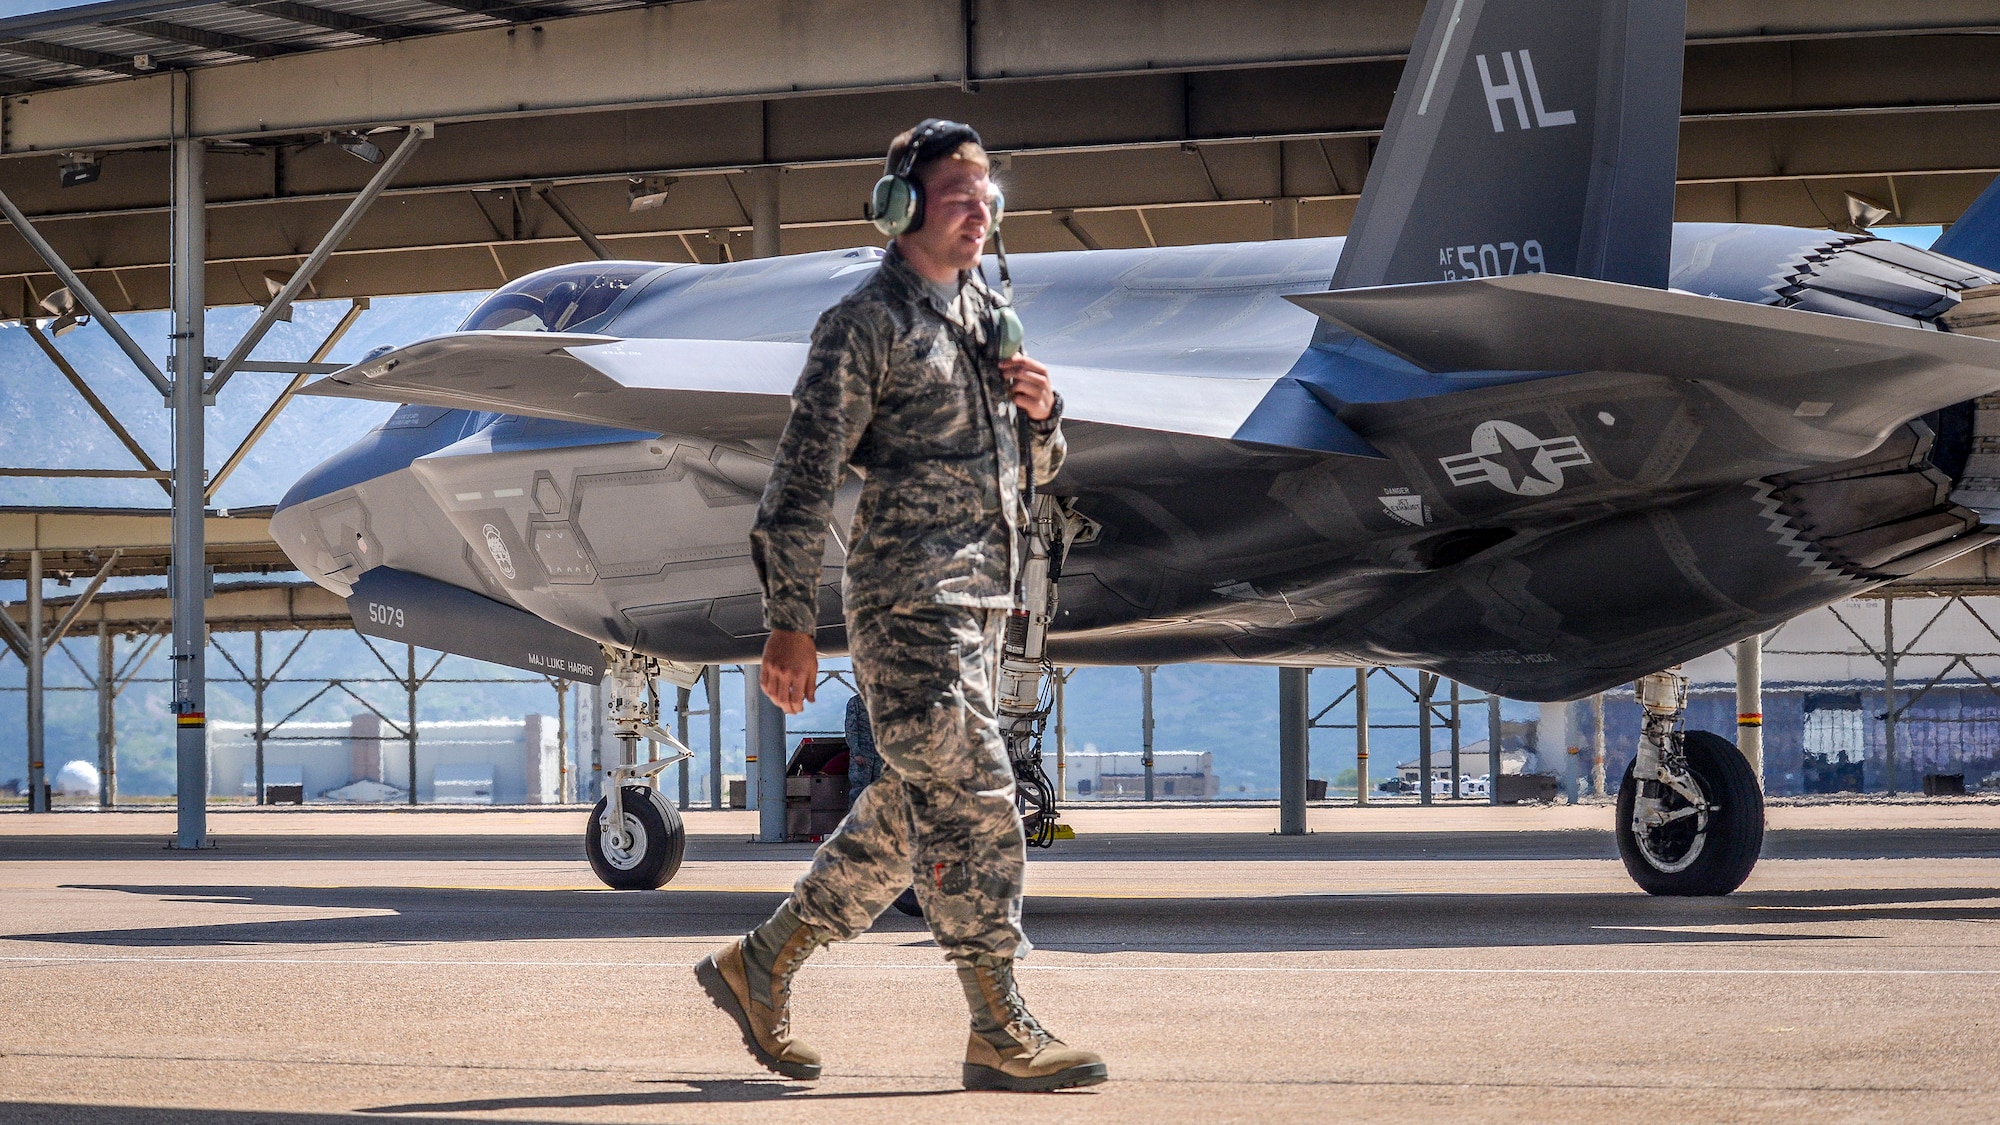 Airman 1st Class Michael Wilkins, a crew chief assigned to the 34th Aircraft Maintenance Unit, walks toward a sun shade after launching an F-35 Lightning II aircraft, number 5079, at Hill Air Force Base, Utah, May 22. In addition to the sortie being the 3,000th in an operational F-35 at Hill, it also turned out to be Wilkens’s first solo launch. (U.S. Air Force/Paul Holcomb)